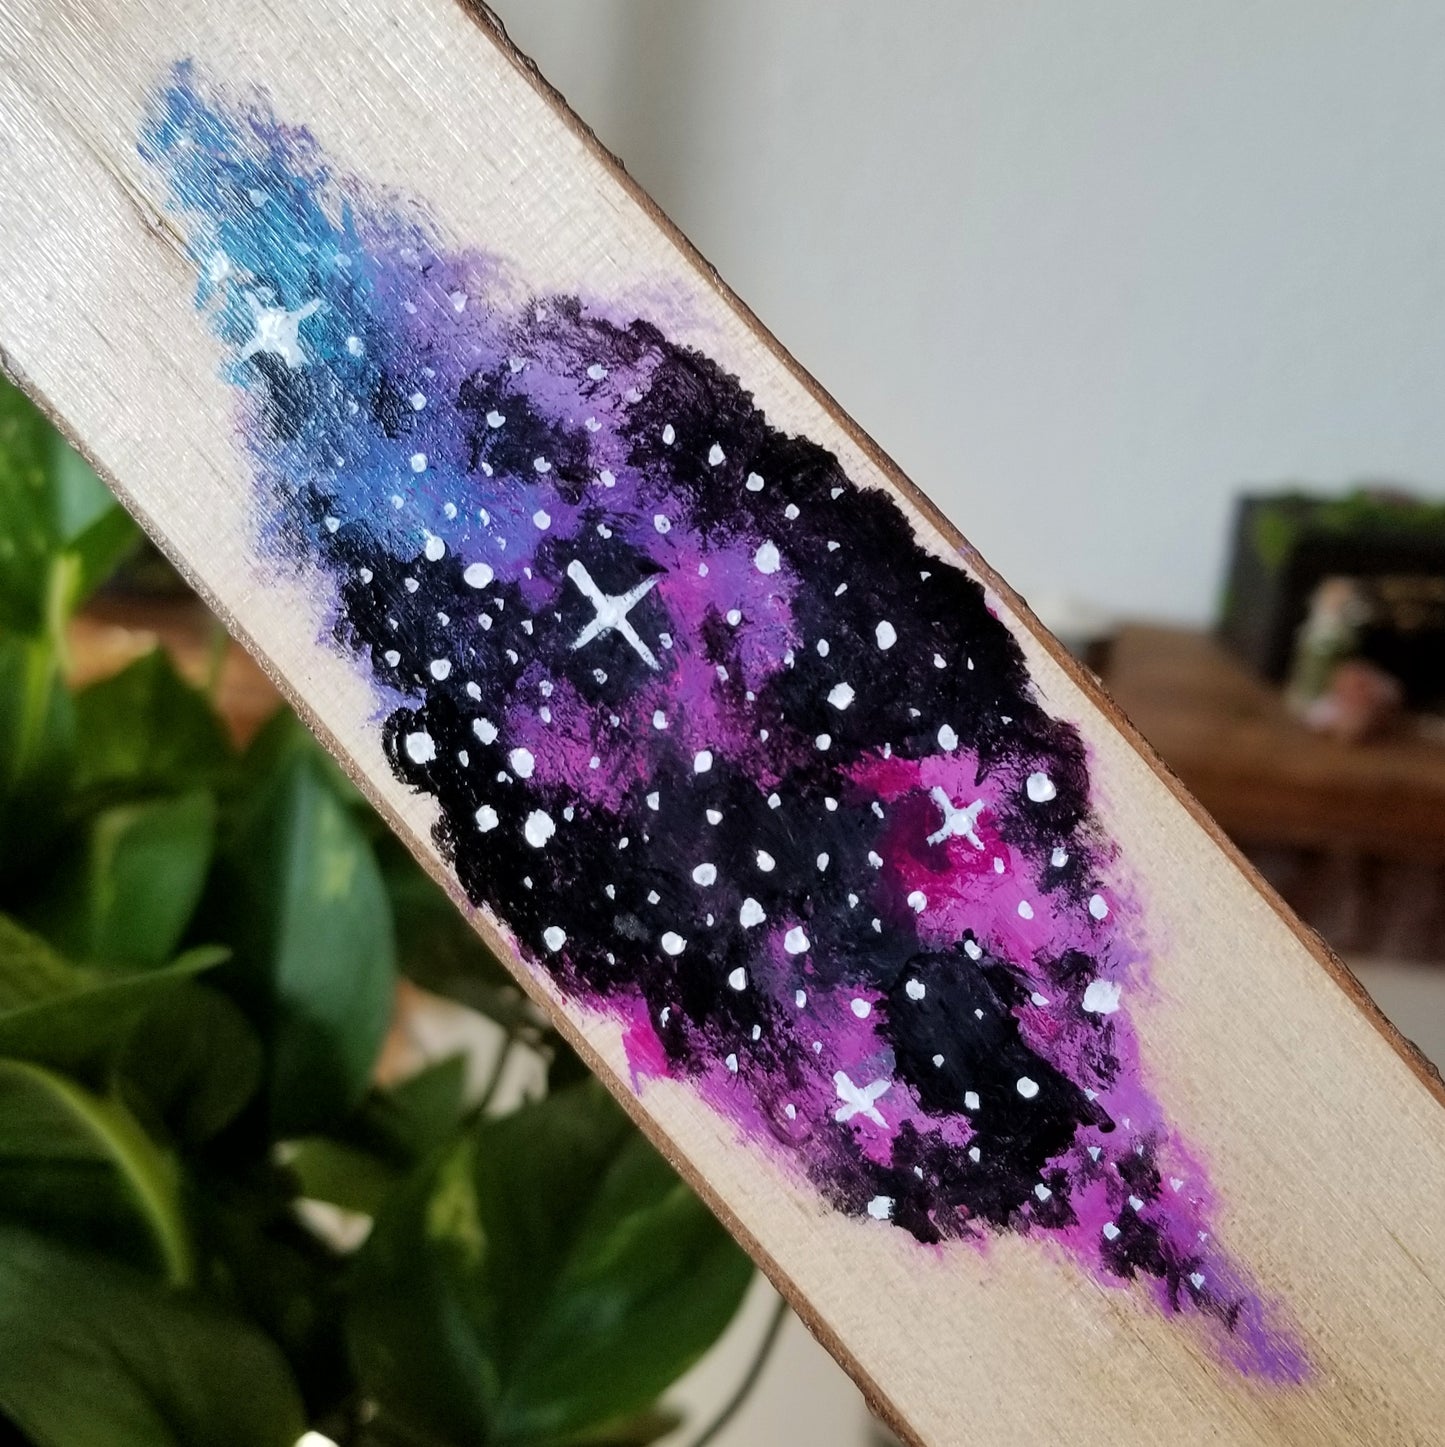 Galaxy Incense Burner with Ametrine and Fluorite